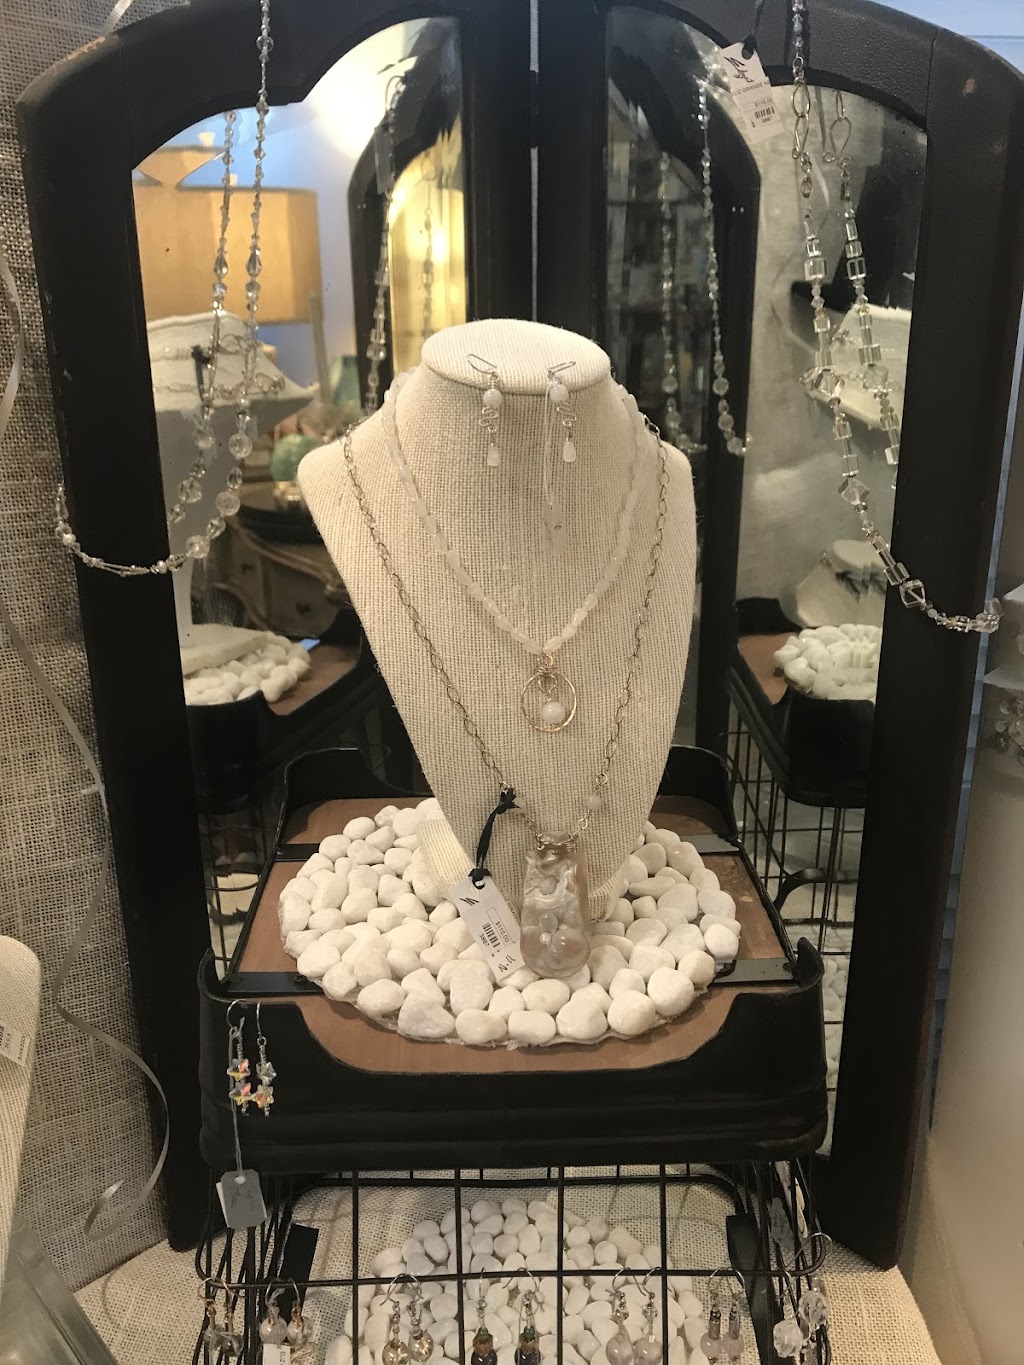 Bay Life Gifts | at Century Hall, 112 S 2nd St, Bay St Louis, MS 39520, USA | Phone: (228) 304-0636